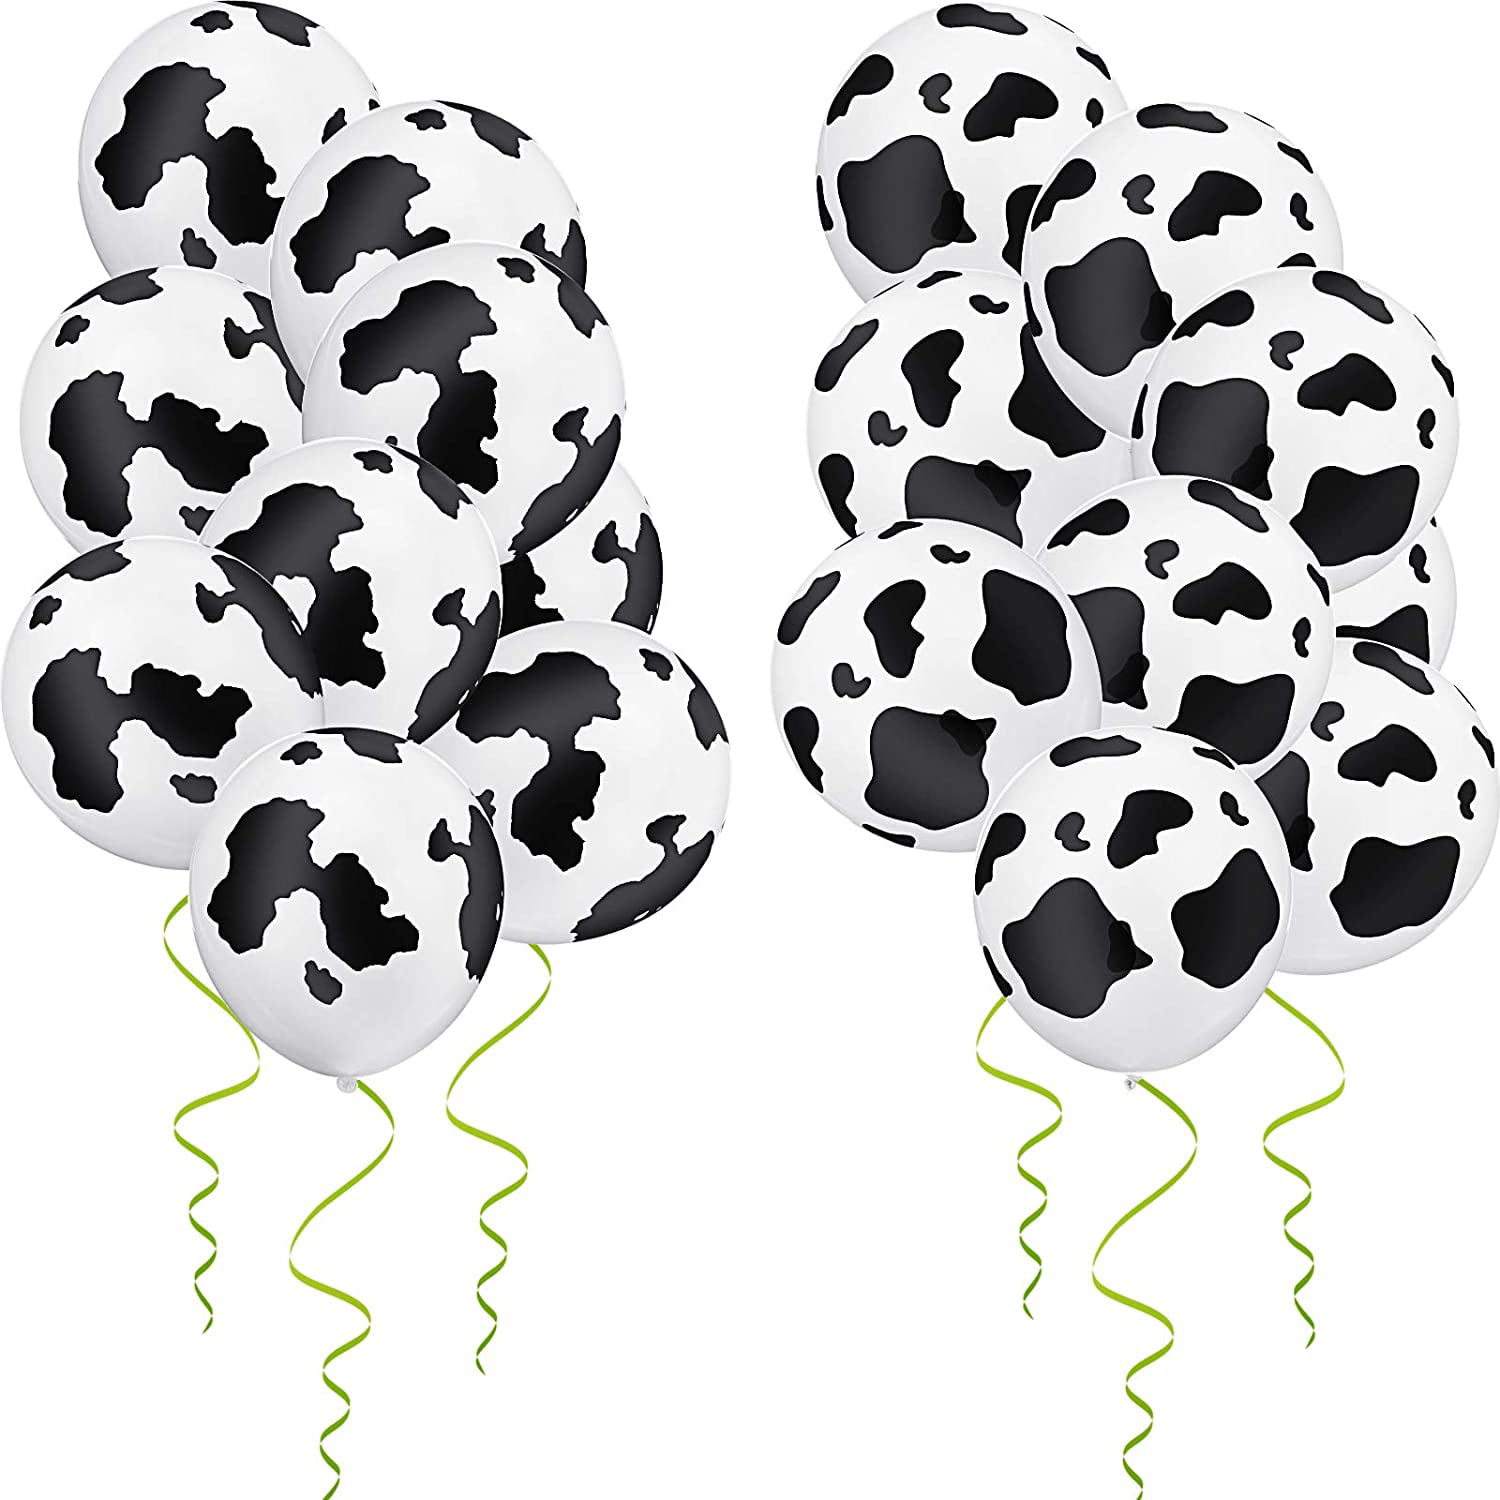 20 Pieces Cow Balloons Latex Balloons Funny Print Cow Balloons for Animal Theme Party Birthday Party Supplies Decorations 12 Inch